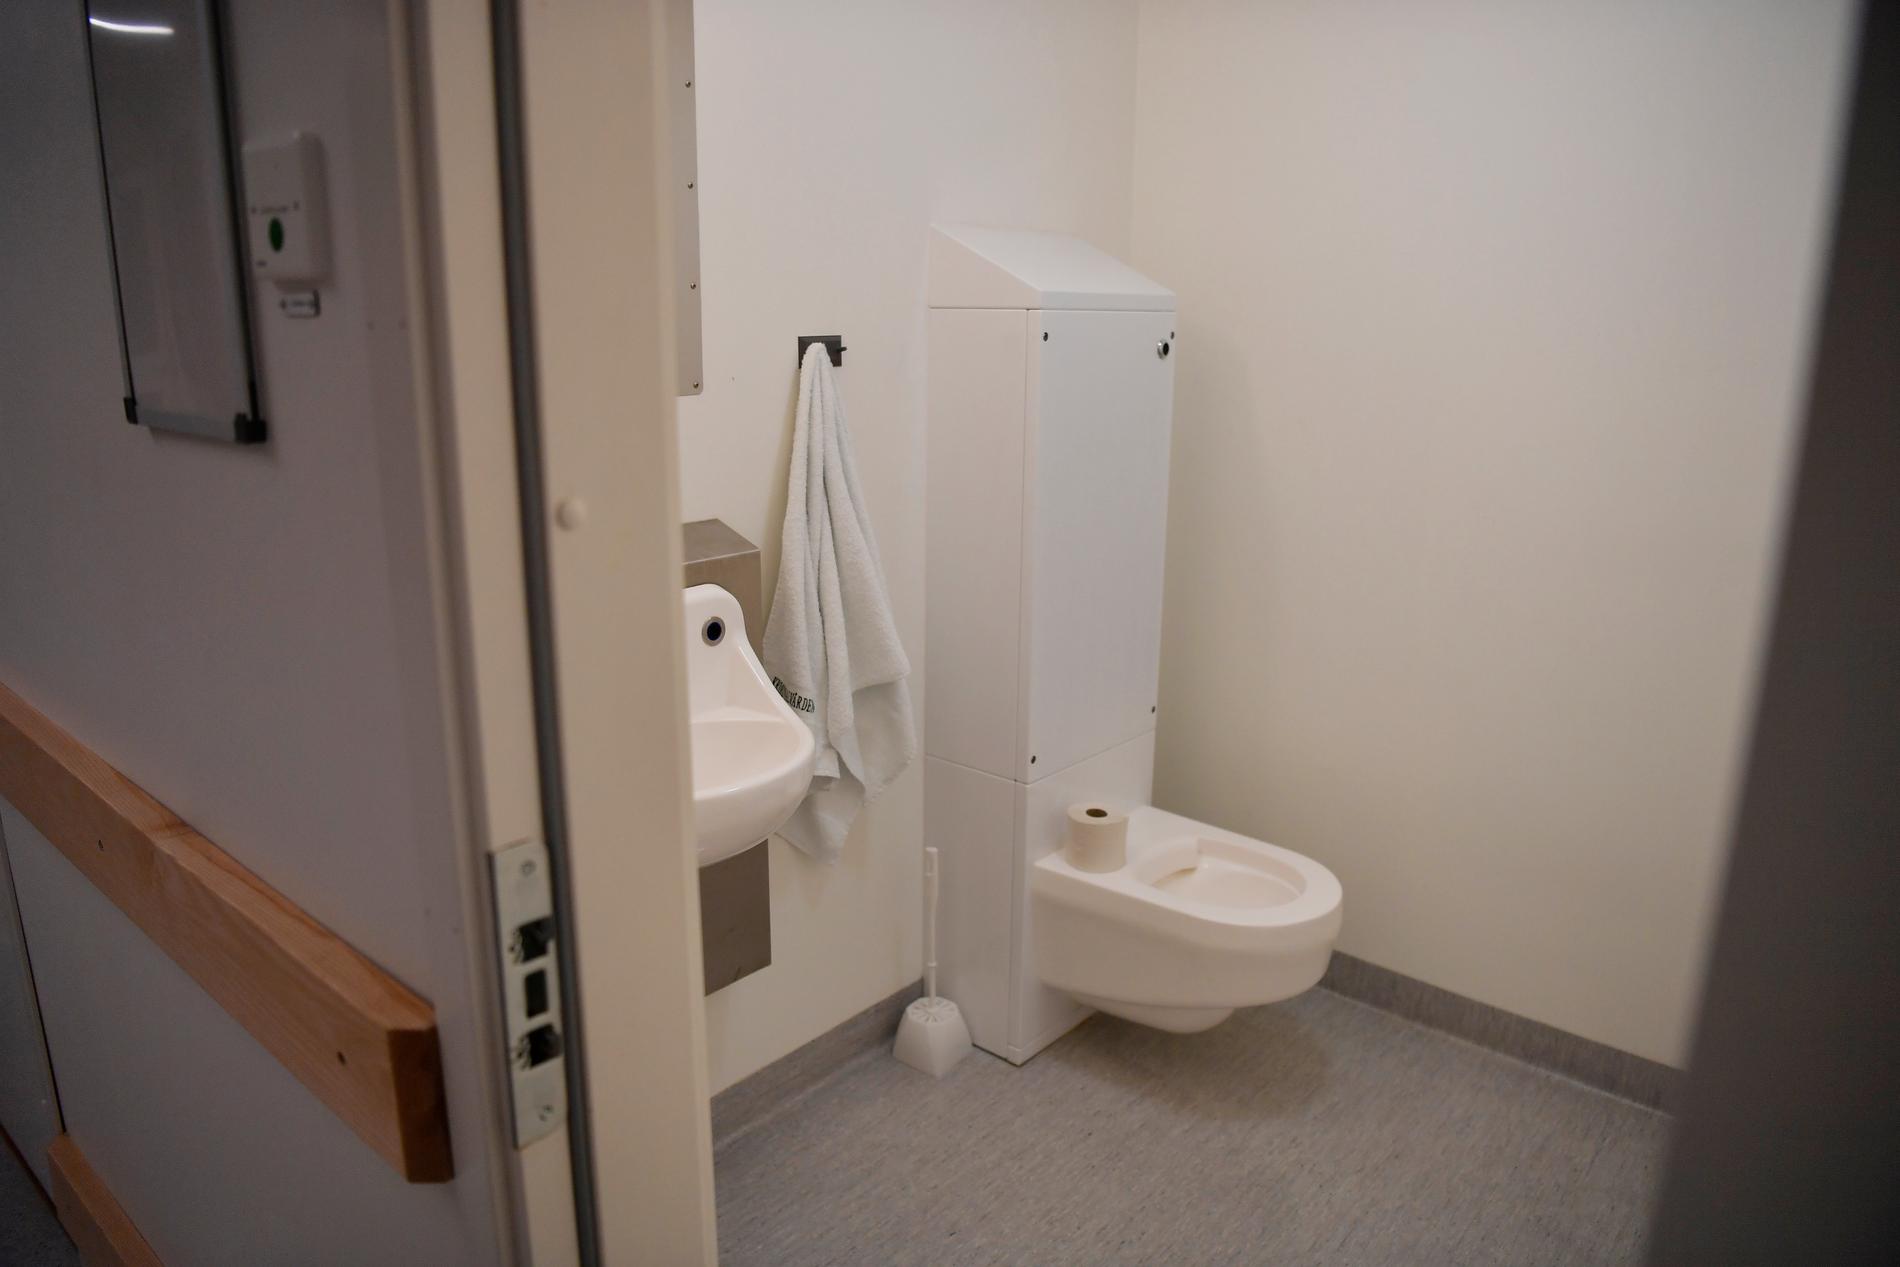 The Kronoberg jail’s bathrooms are in the corridor.